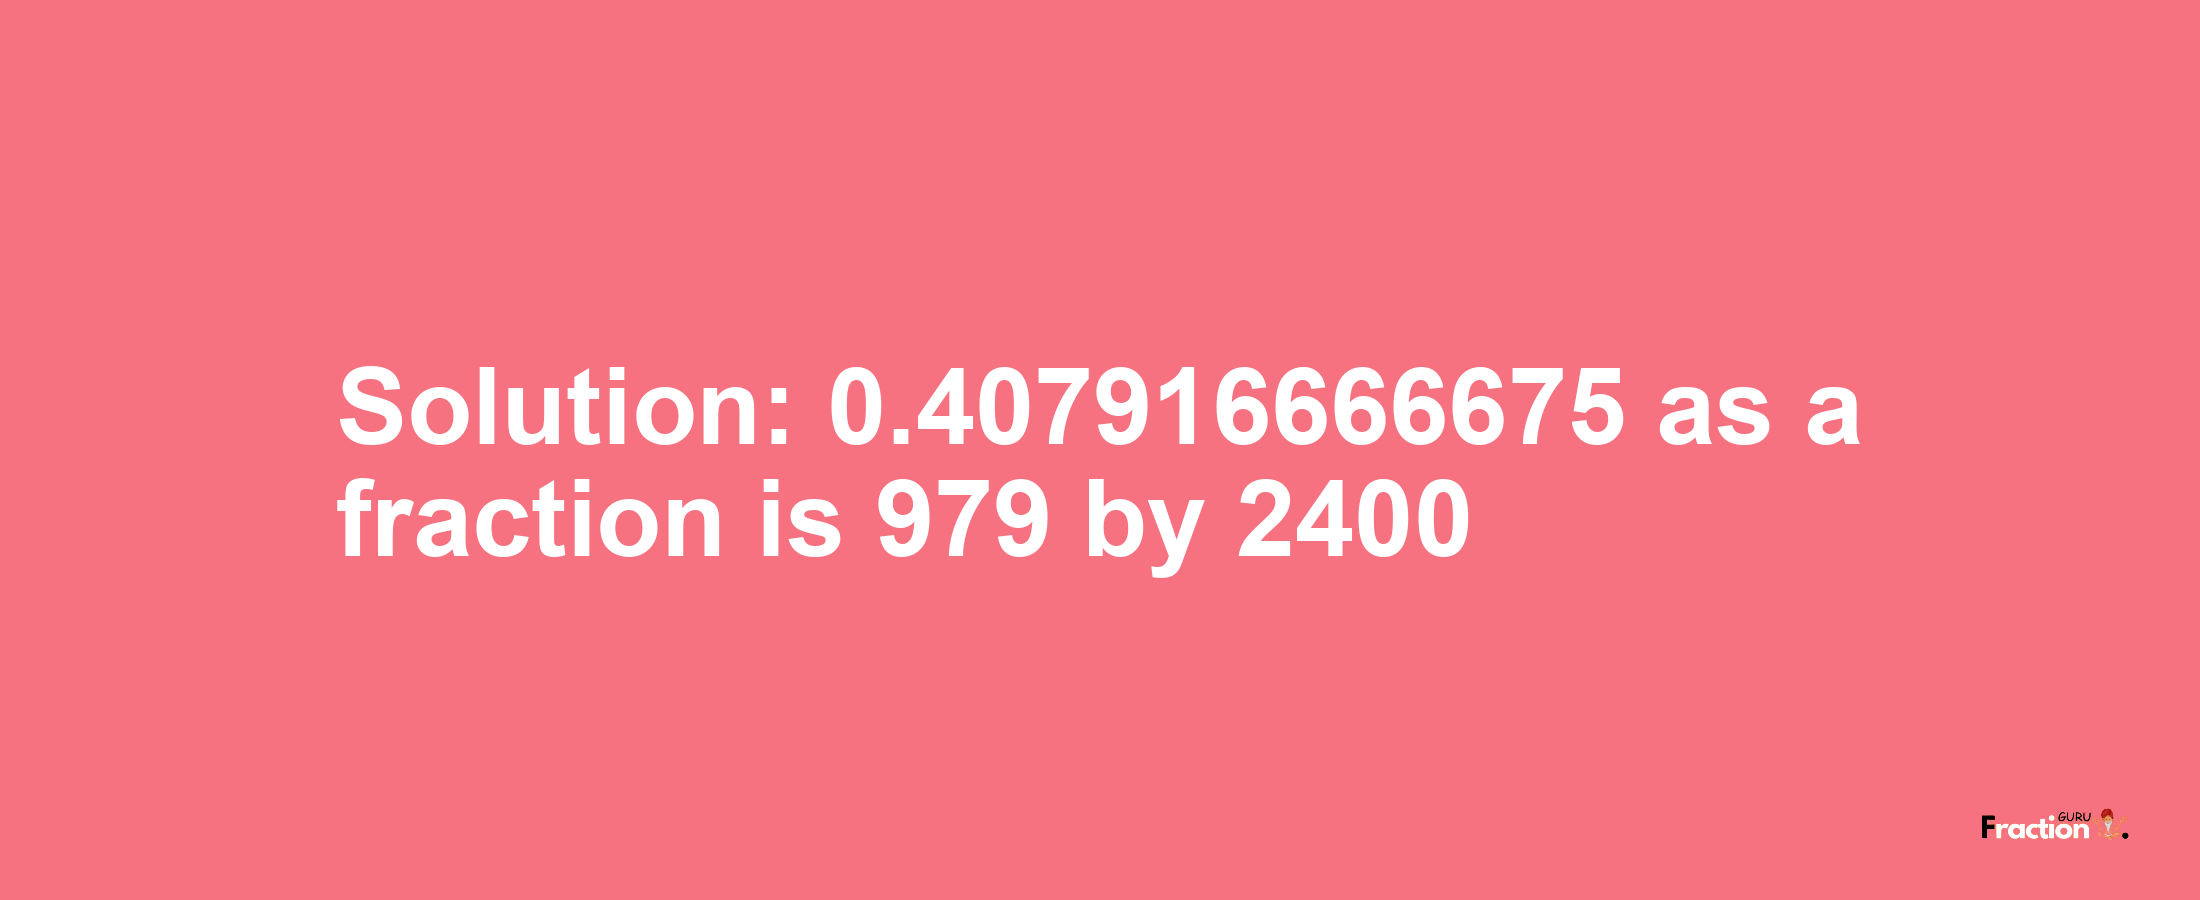 Solution:0.407916666675 as a fraction is 979/2400